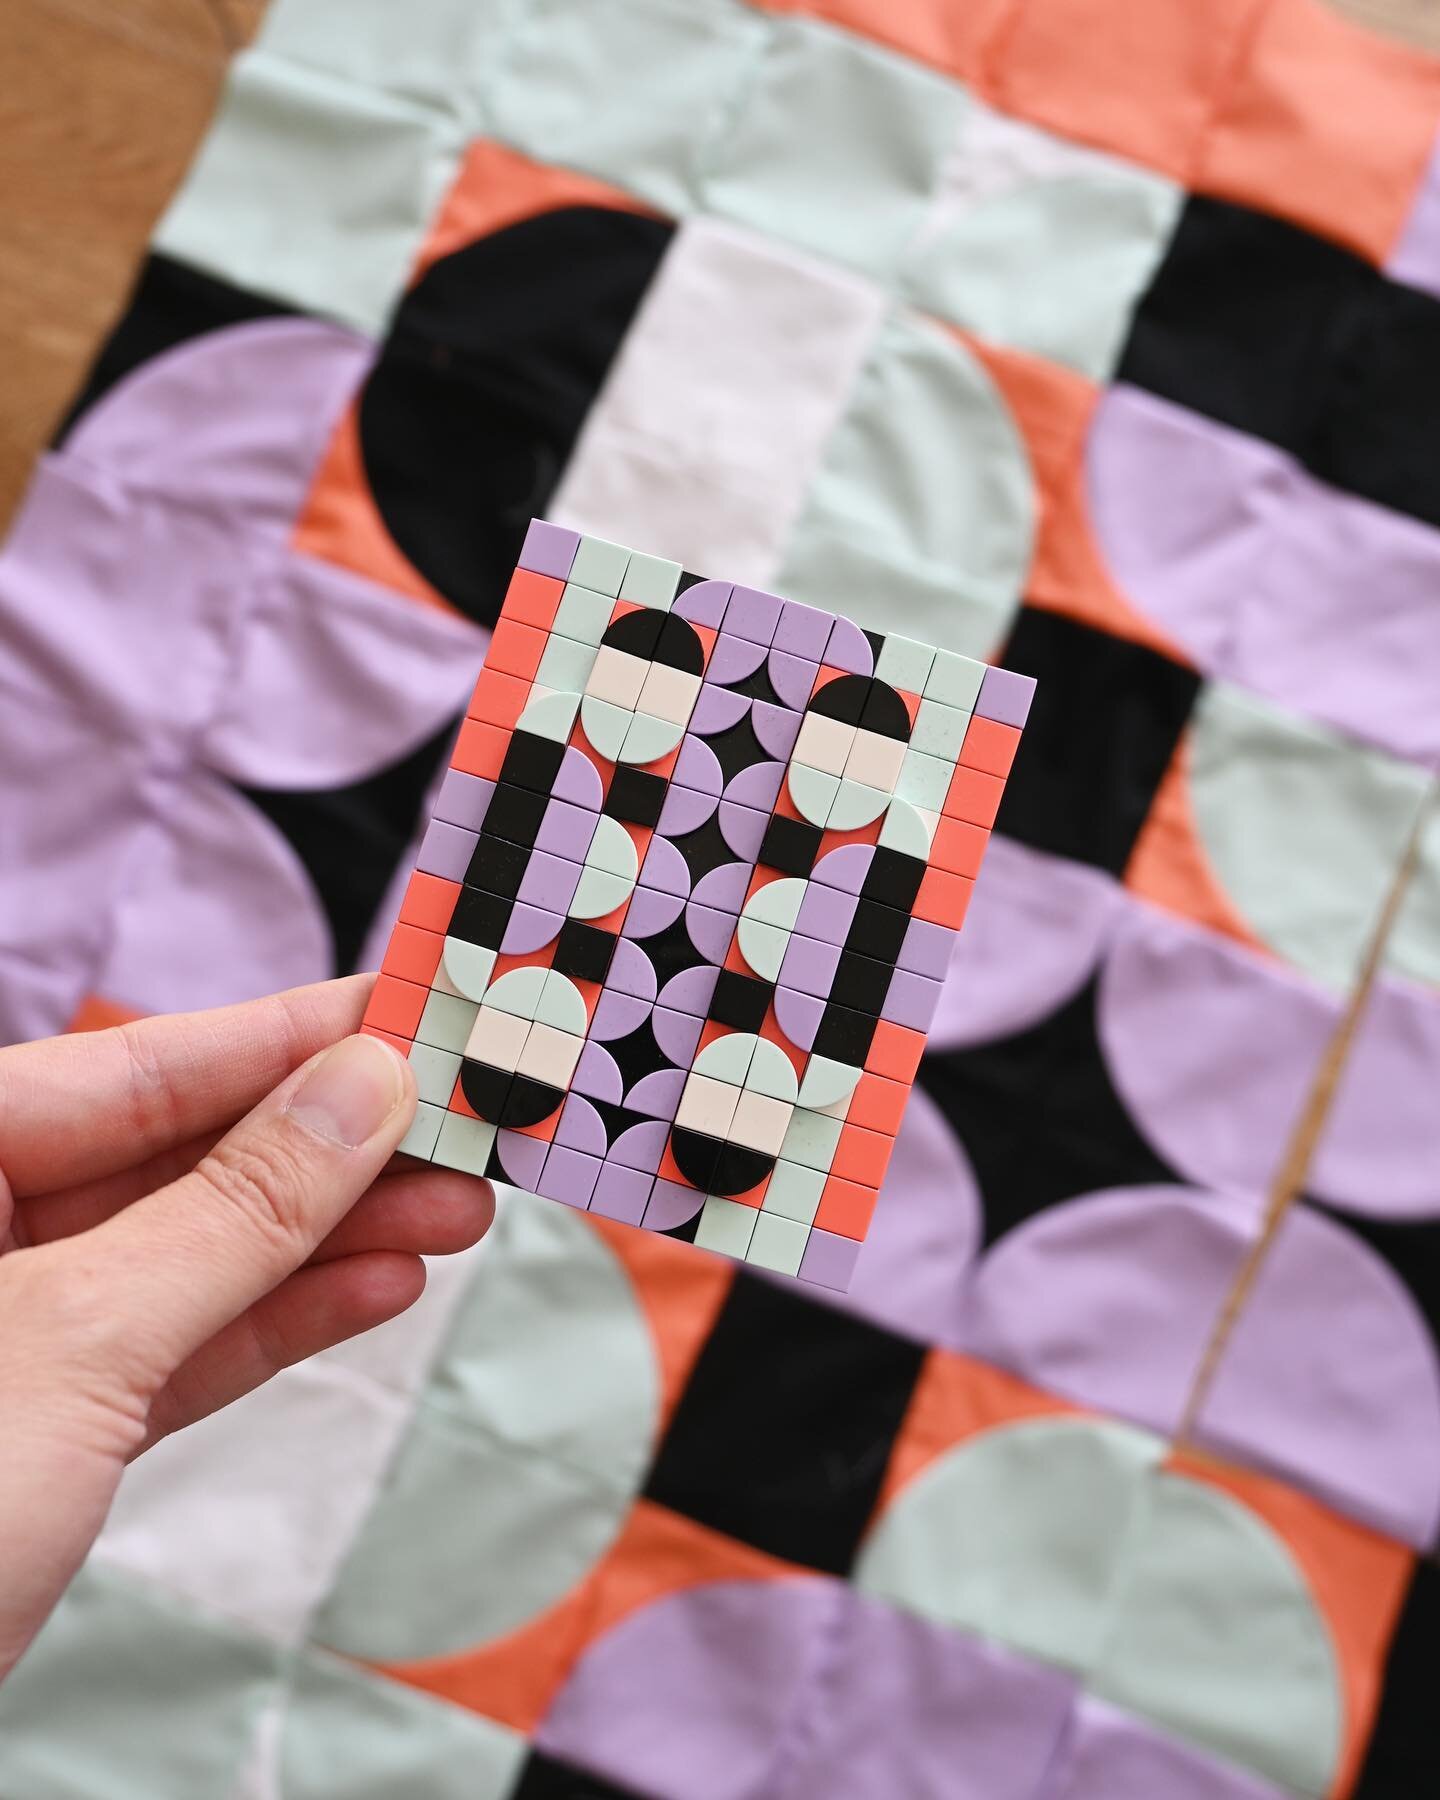 DOTTY MAY Dots Quilt - my son Weston made this @lego DOTS piece in 2020 when he was 5 years old. I loved the symmetry of the design and immediately thought of a quilt when I saw this. Three years later, I&rsquo;m finally making it into a quilt for hi